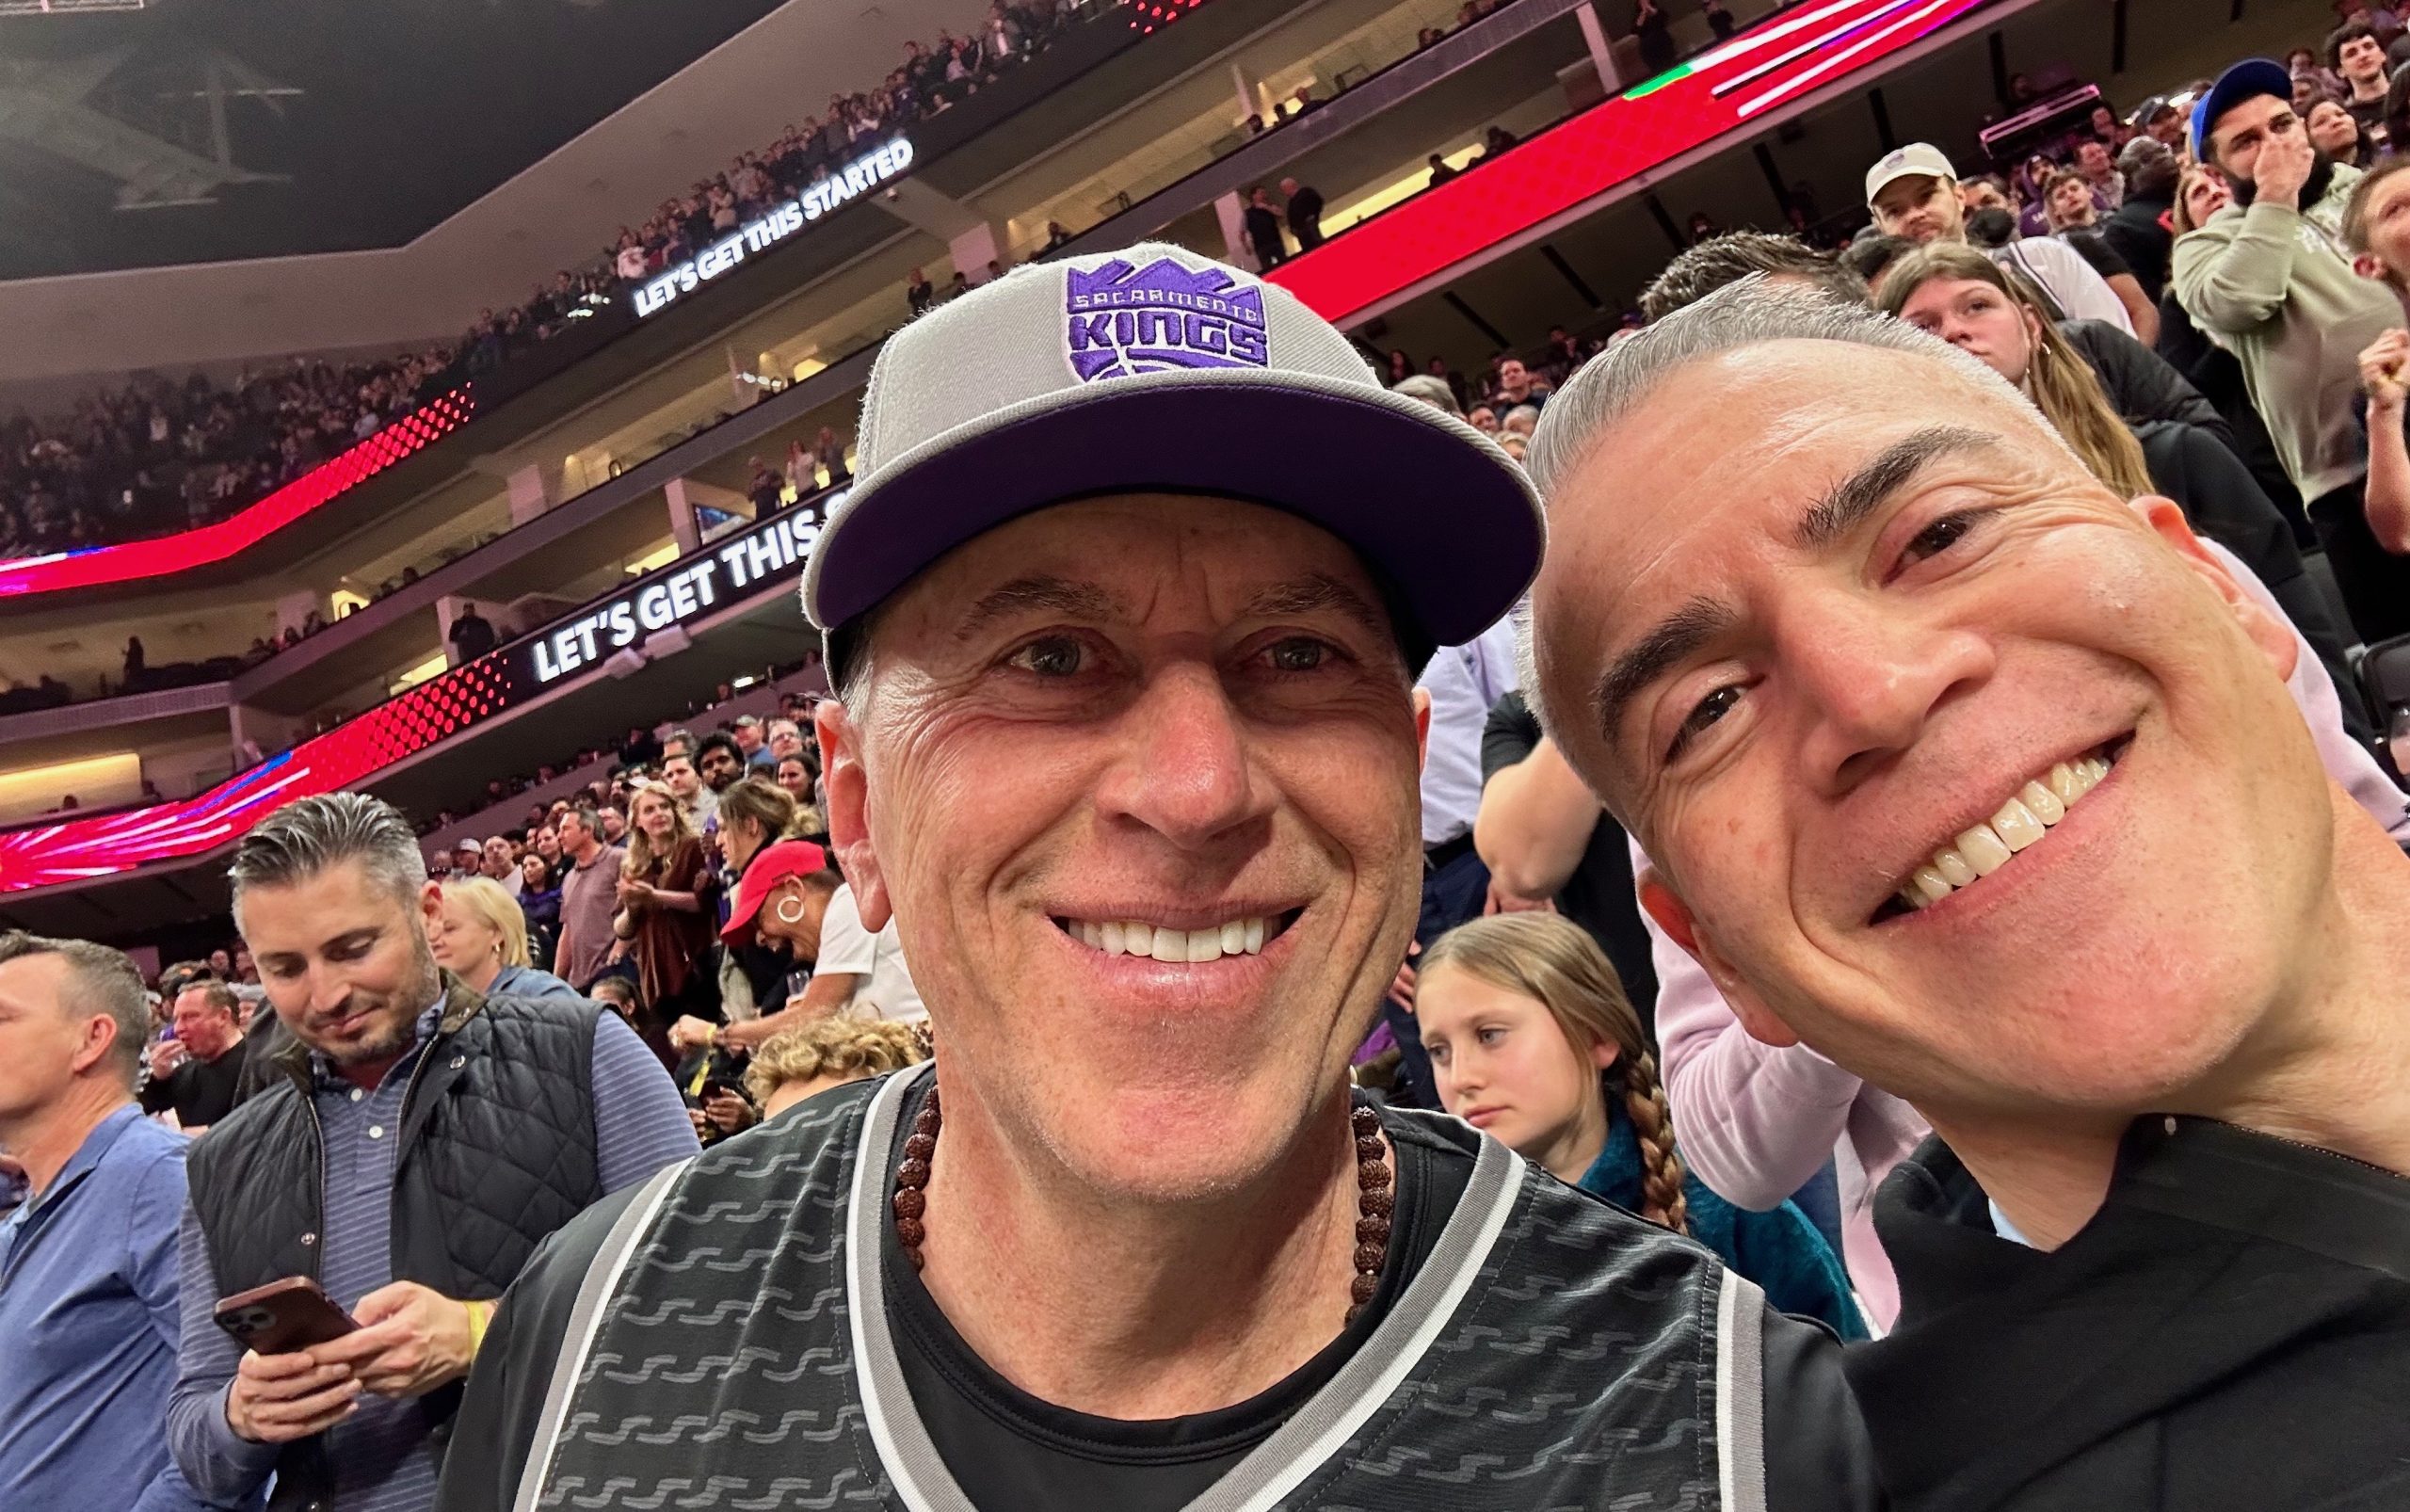 Sacramento Kings sued by LGBTQ couple alleging assault and discrimination • Sacramento News and Review